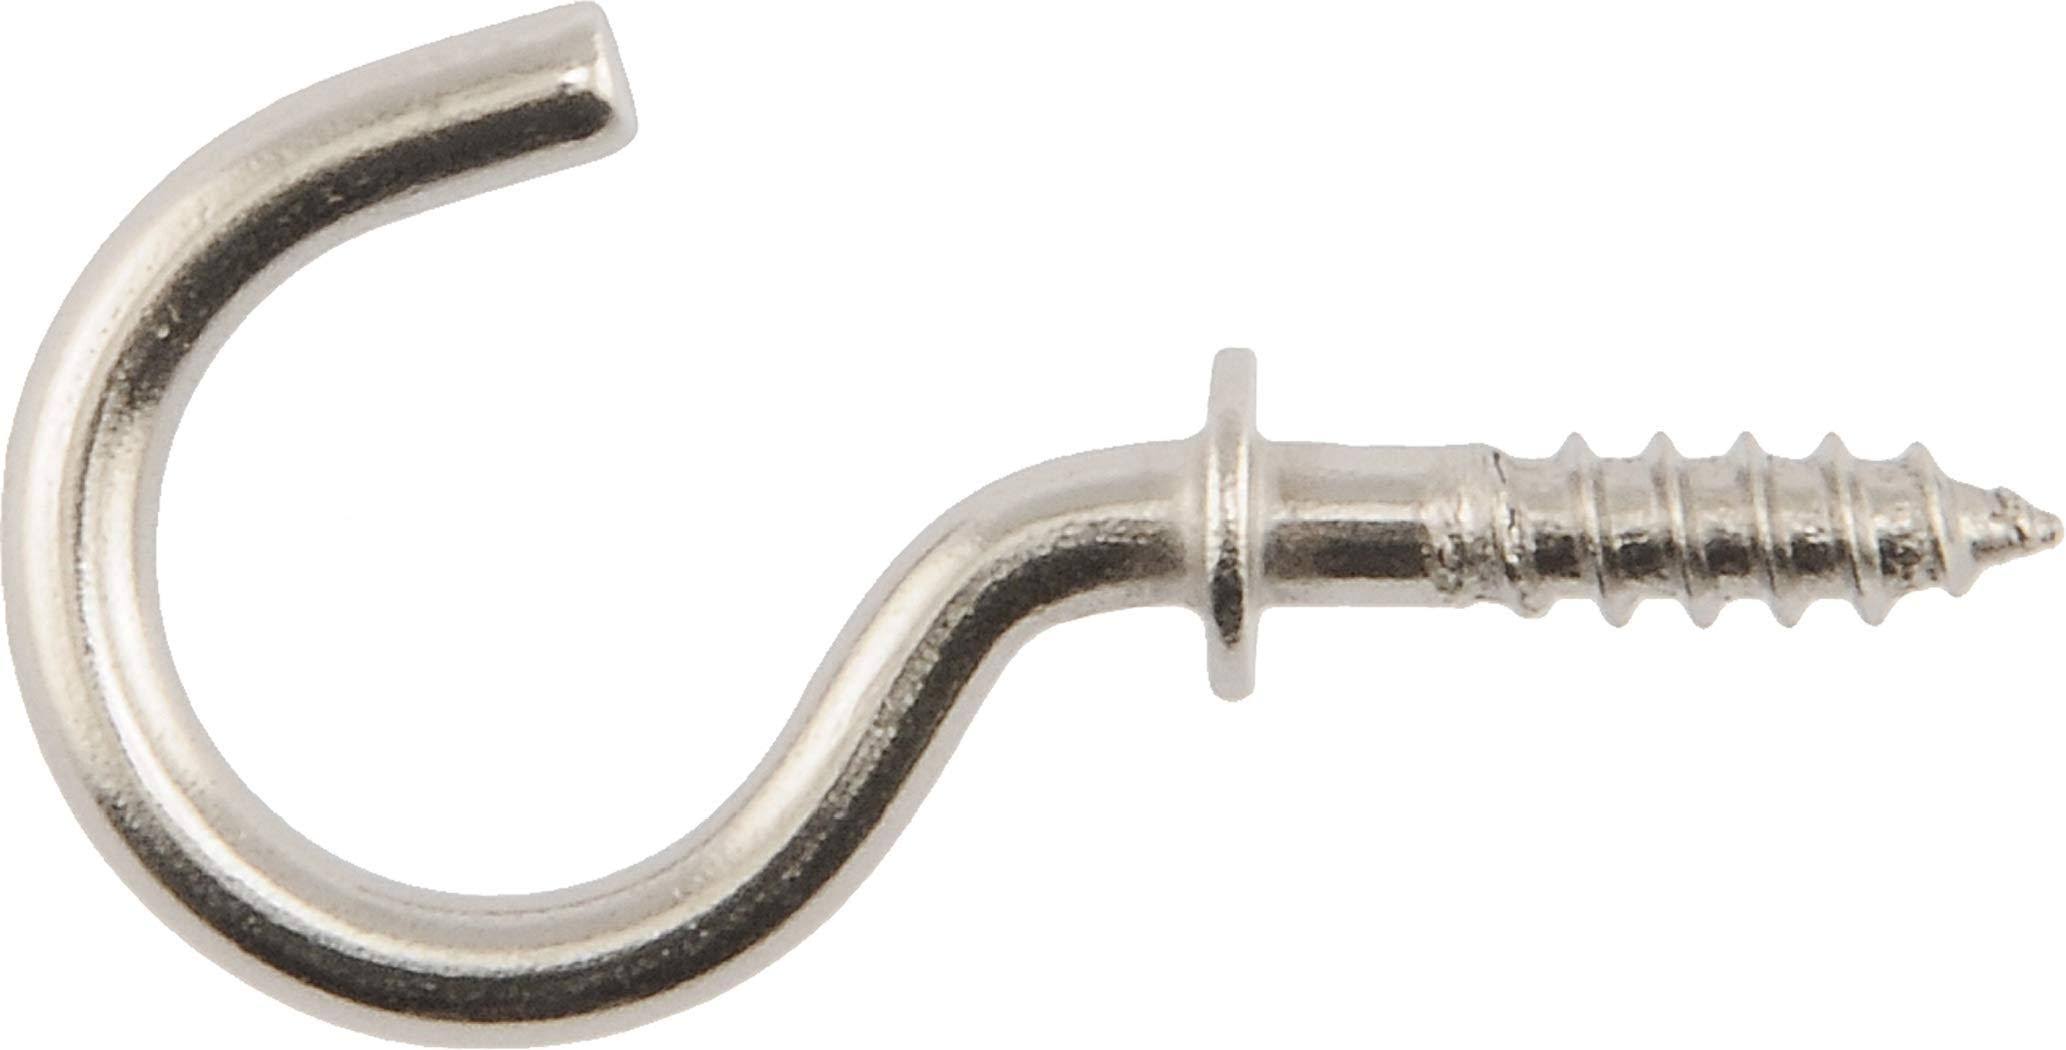 The Hillman Group The Hillman Group 853300 3/4 in. Cup Hook- Stainless Steel 4-Pack